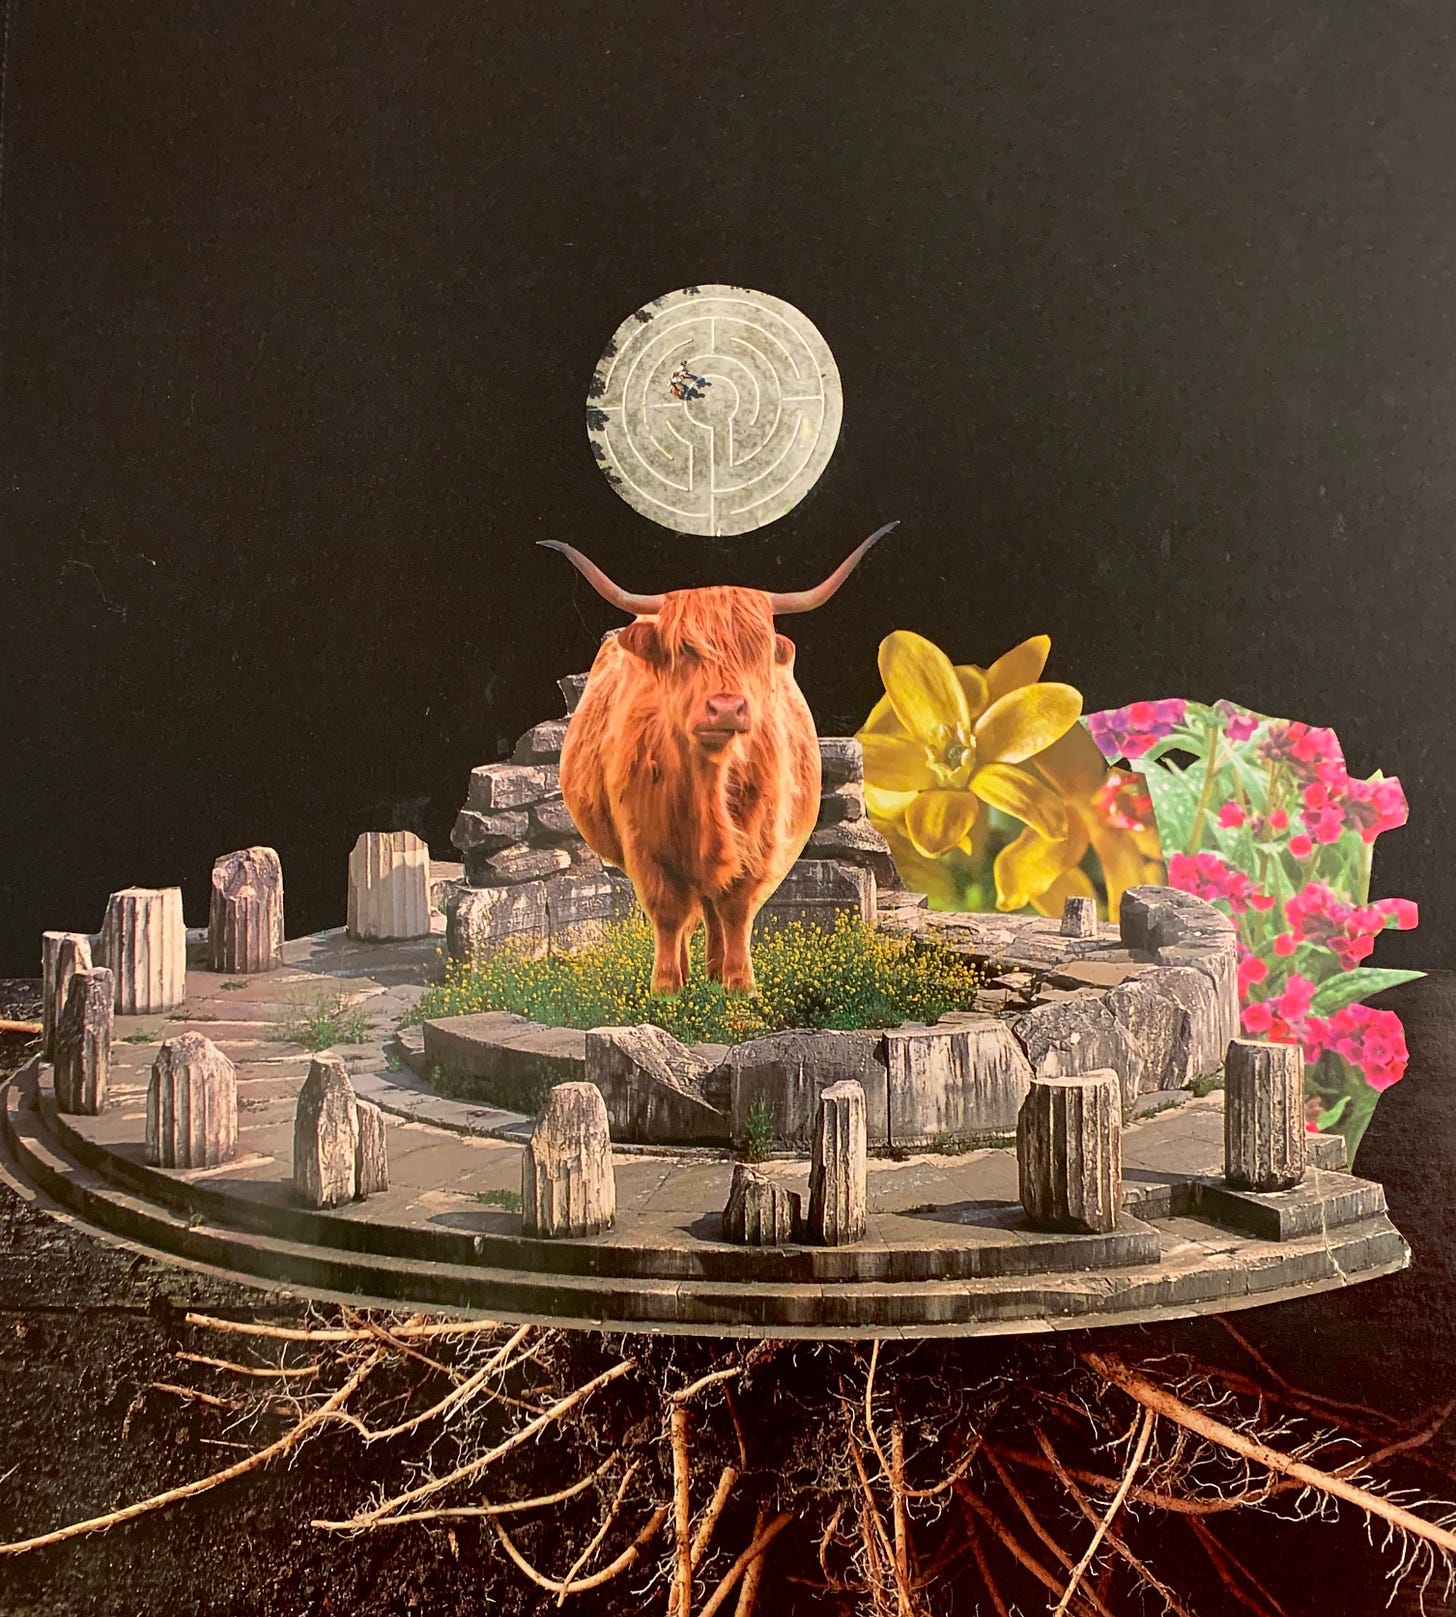 A paper cut collage featuring the ruins of a Greek temple. In the center stands a horned ox or bull, with a labyrinth between its horns. Behind the ruin are yellow and pink flowers and below are large branching roots.